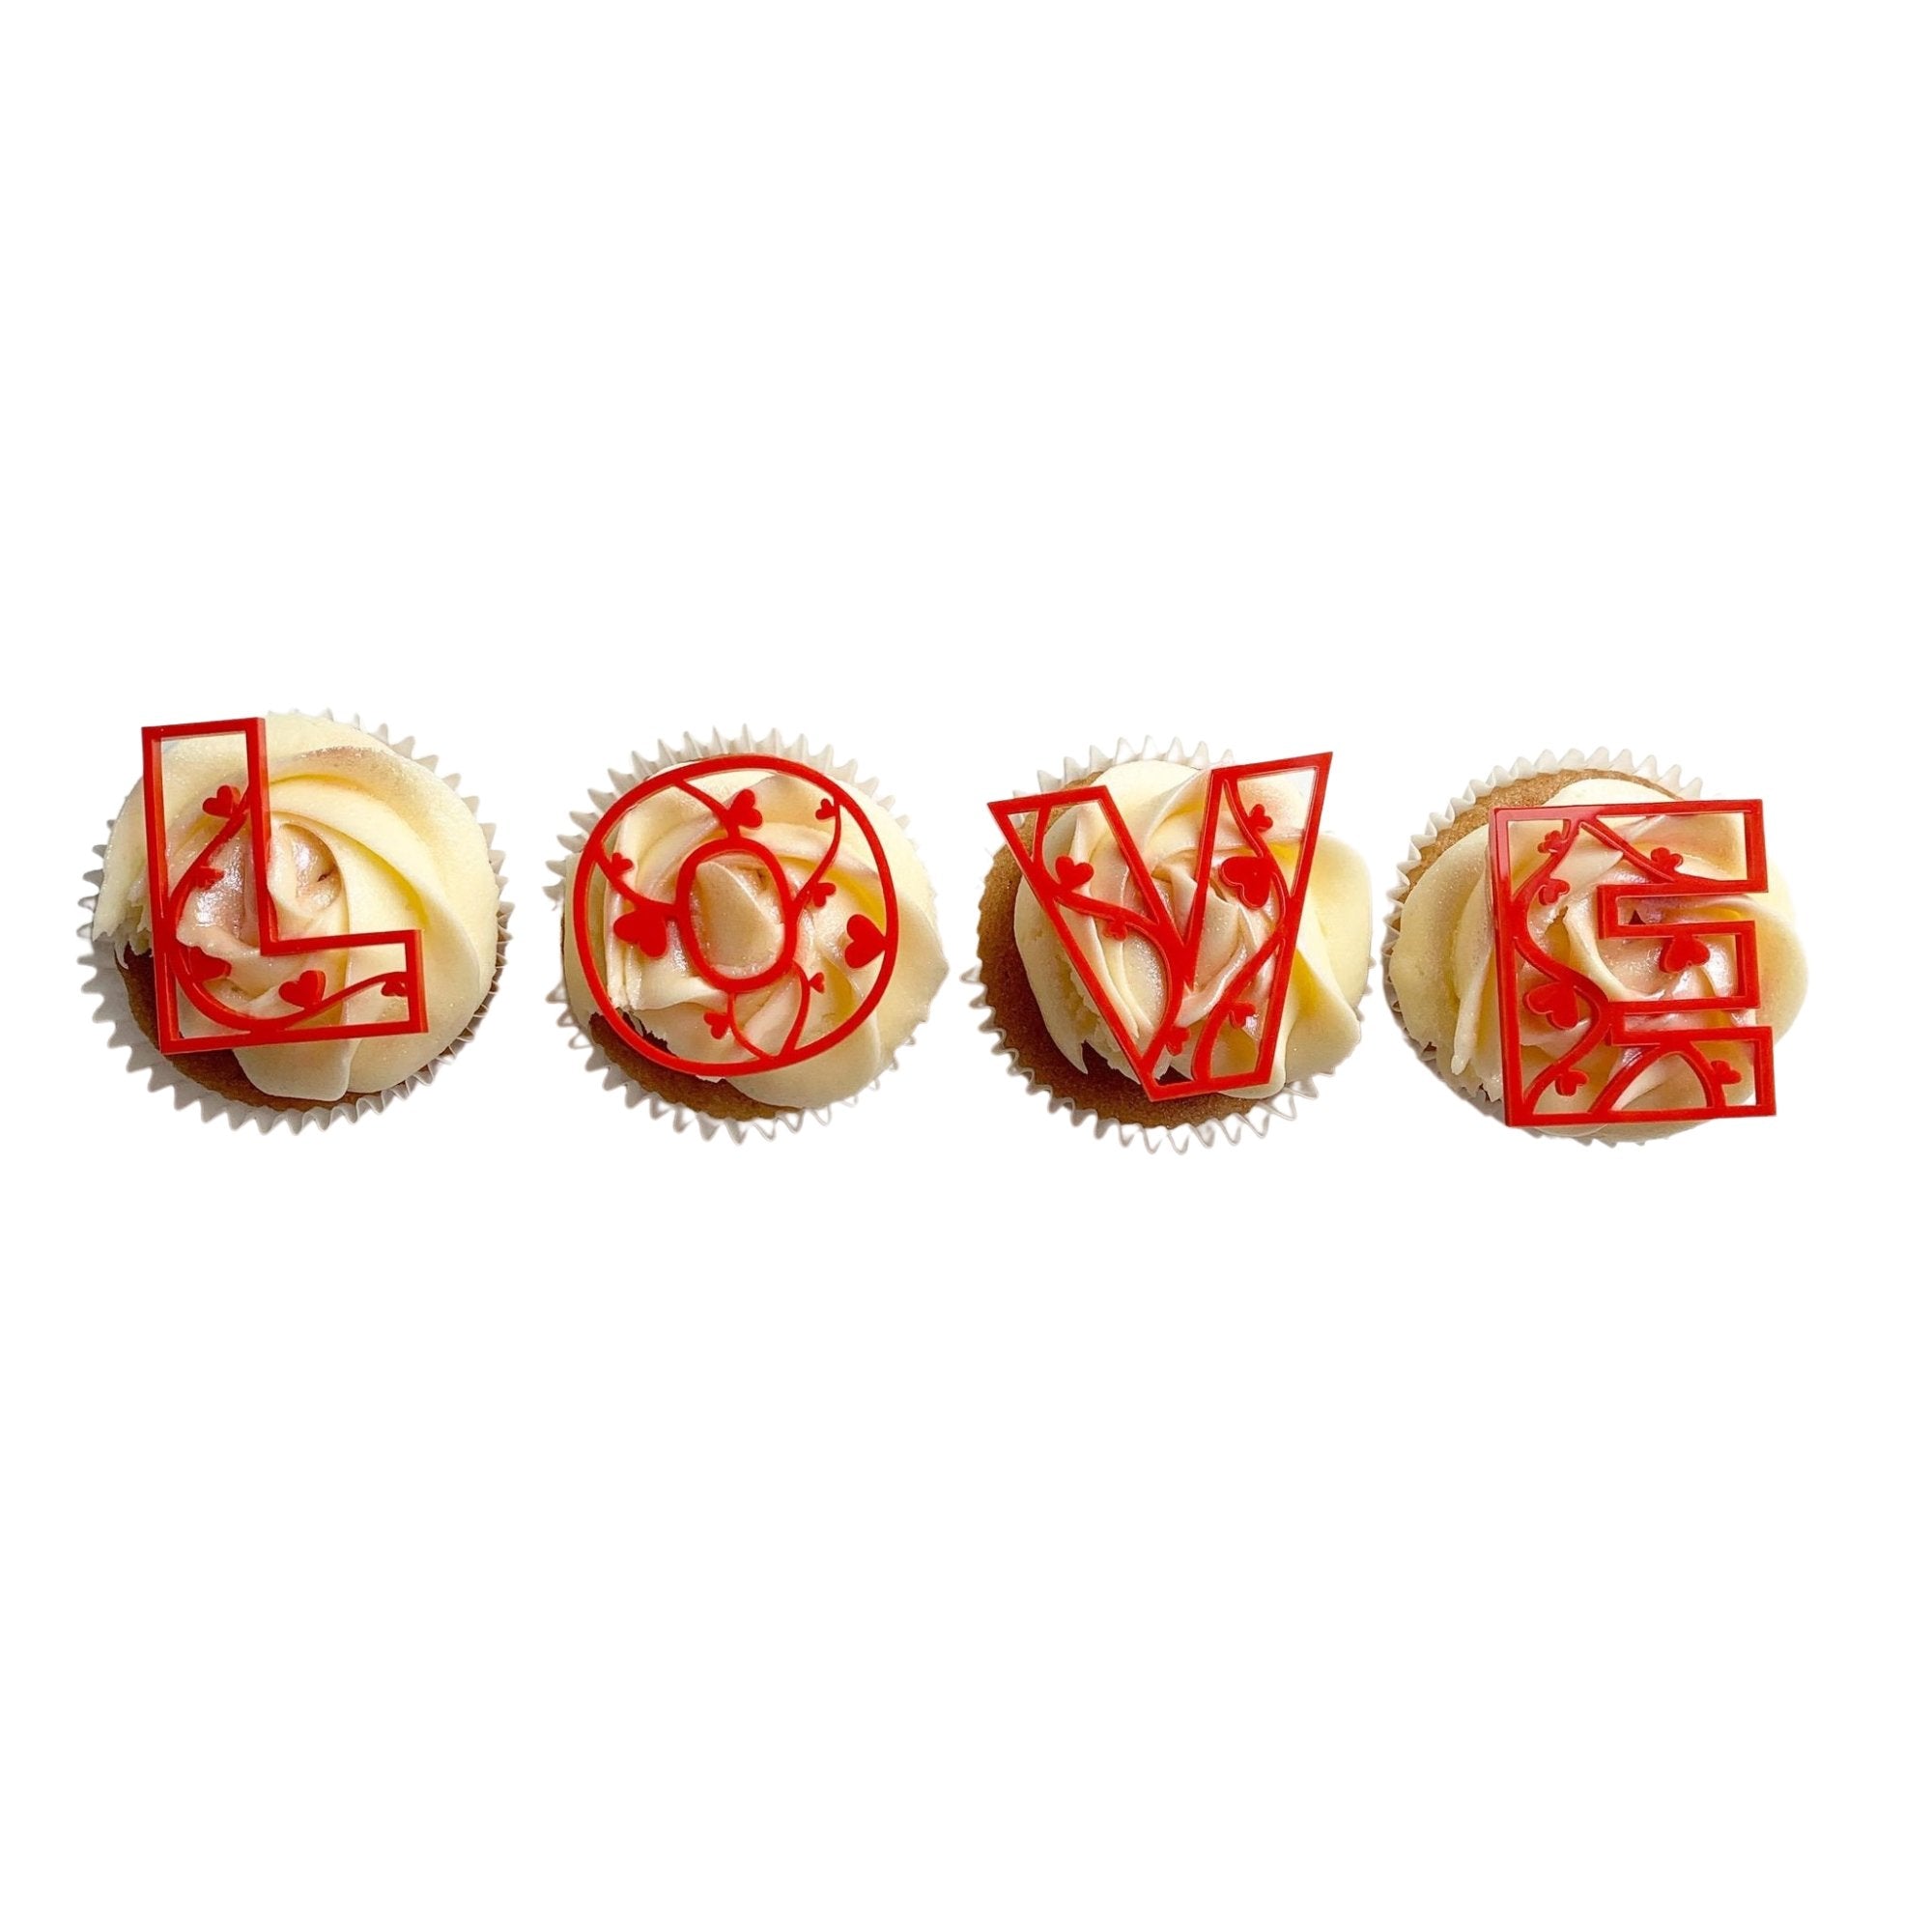 LOVE Cupcake Charms - Valentines Day Cupcakes - Cake Topper Warehouse